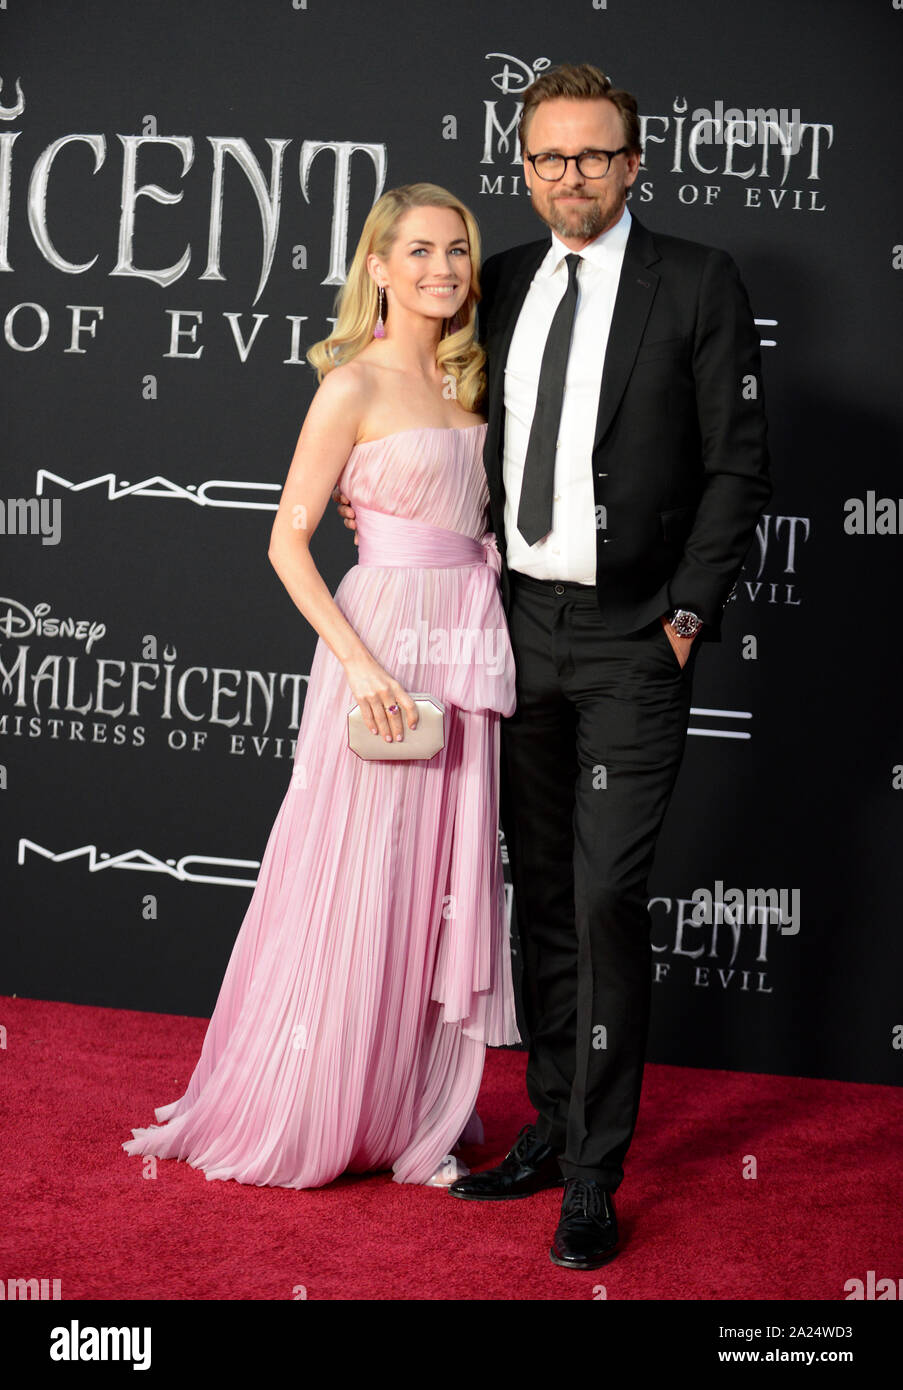 Los Angeles, USA. 30th Sep, 2019. Los Angeles, USA. 30th Sep, 2019. Amanda Hearst & Joachim Ronning at the world premiere of 'Maleficent: Mistress of Evil' at the El Capitan Theatre. Picture: Jessica Sherman/Featureflash Credit: Paul Smith/Alamy Live News Stock Photo